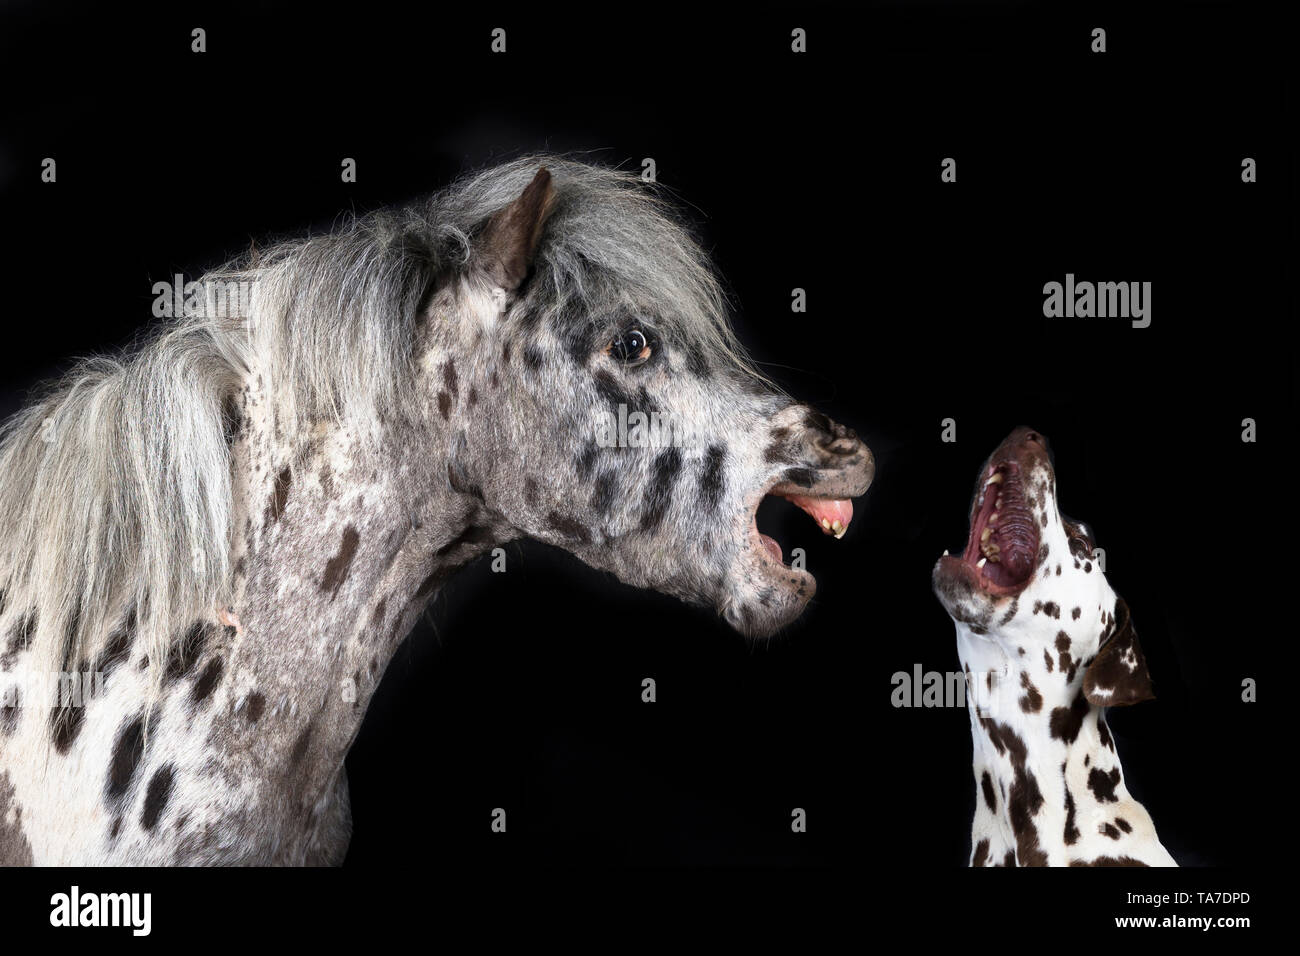 Miniature Appaloosa and Dalmatian dog. Adult horse neighing and adult dog howling. Studio picture against a black background. Germany Stock Photo